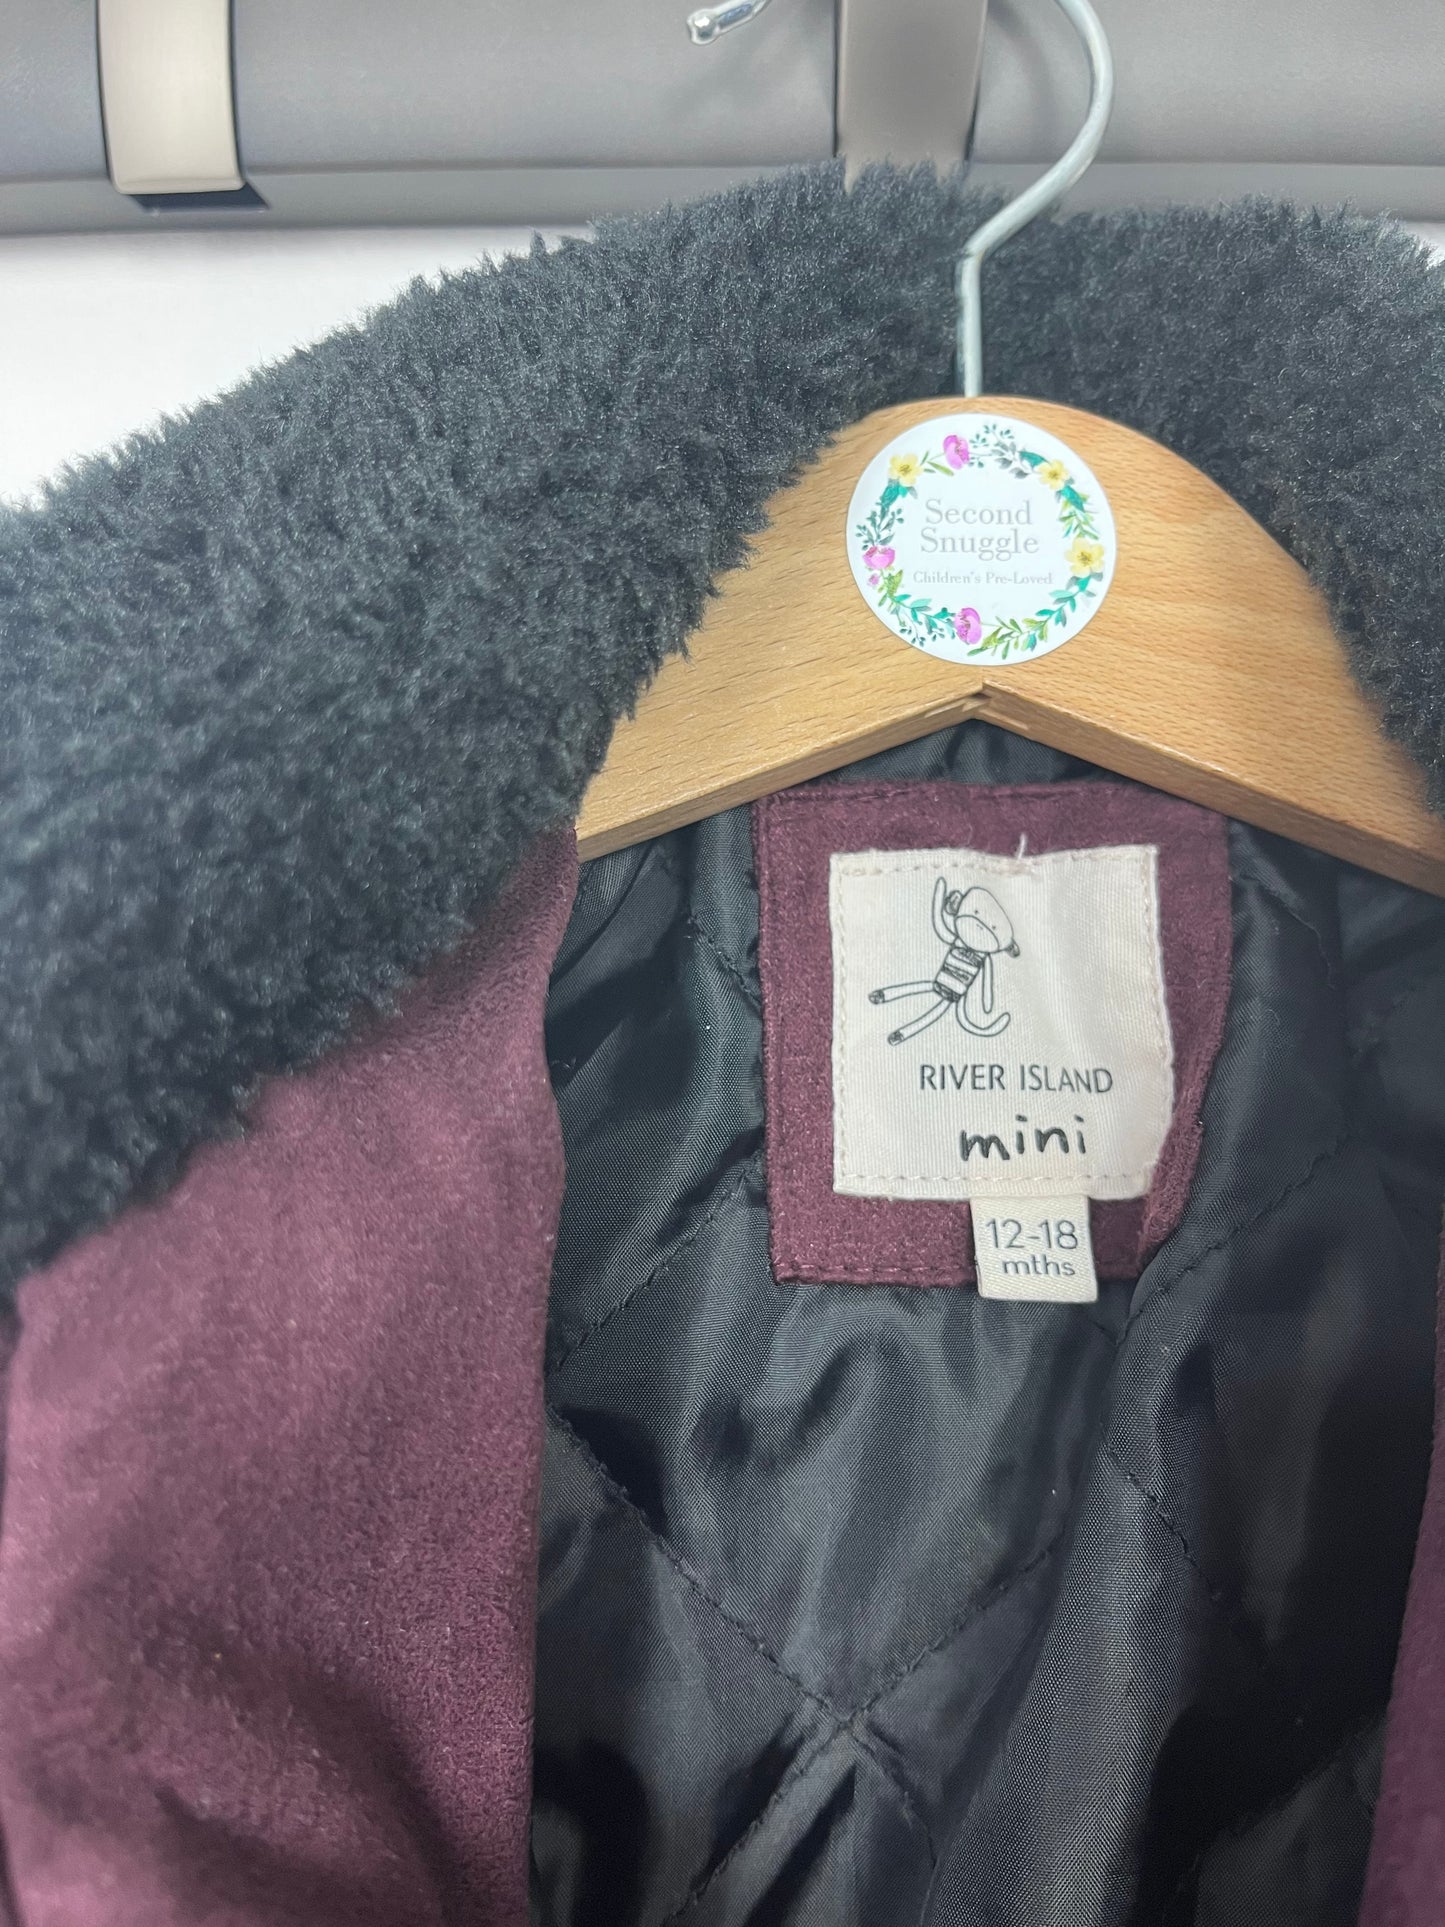 River Island Mini 12-18 Months-Jackets-Second Snuggle Preloved